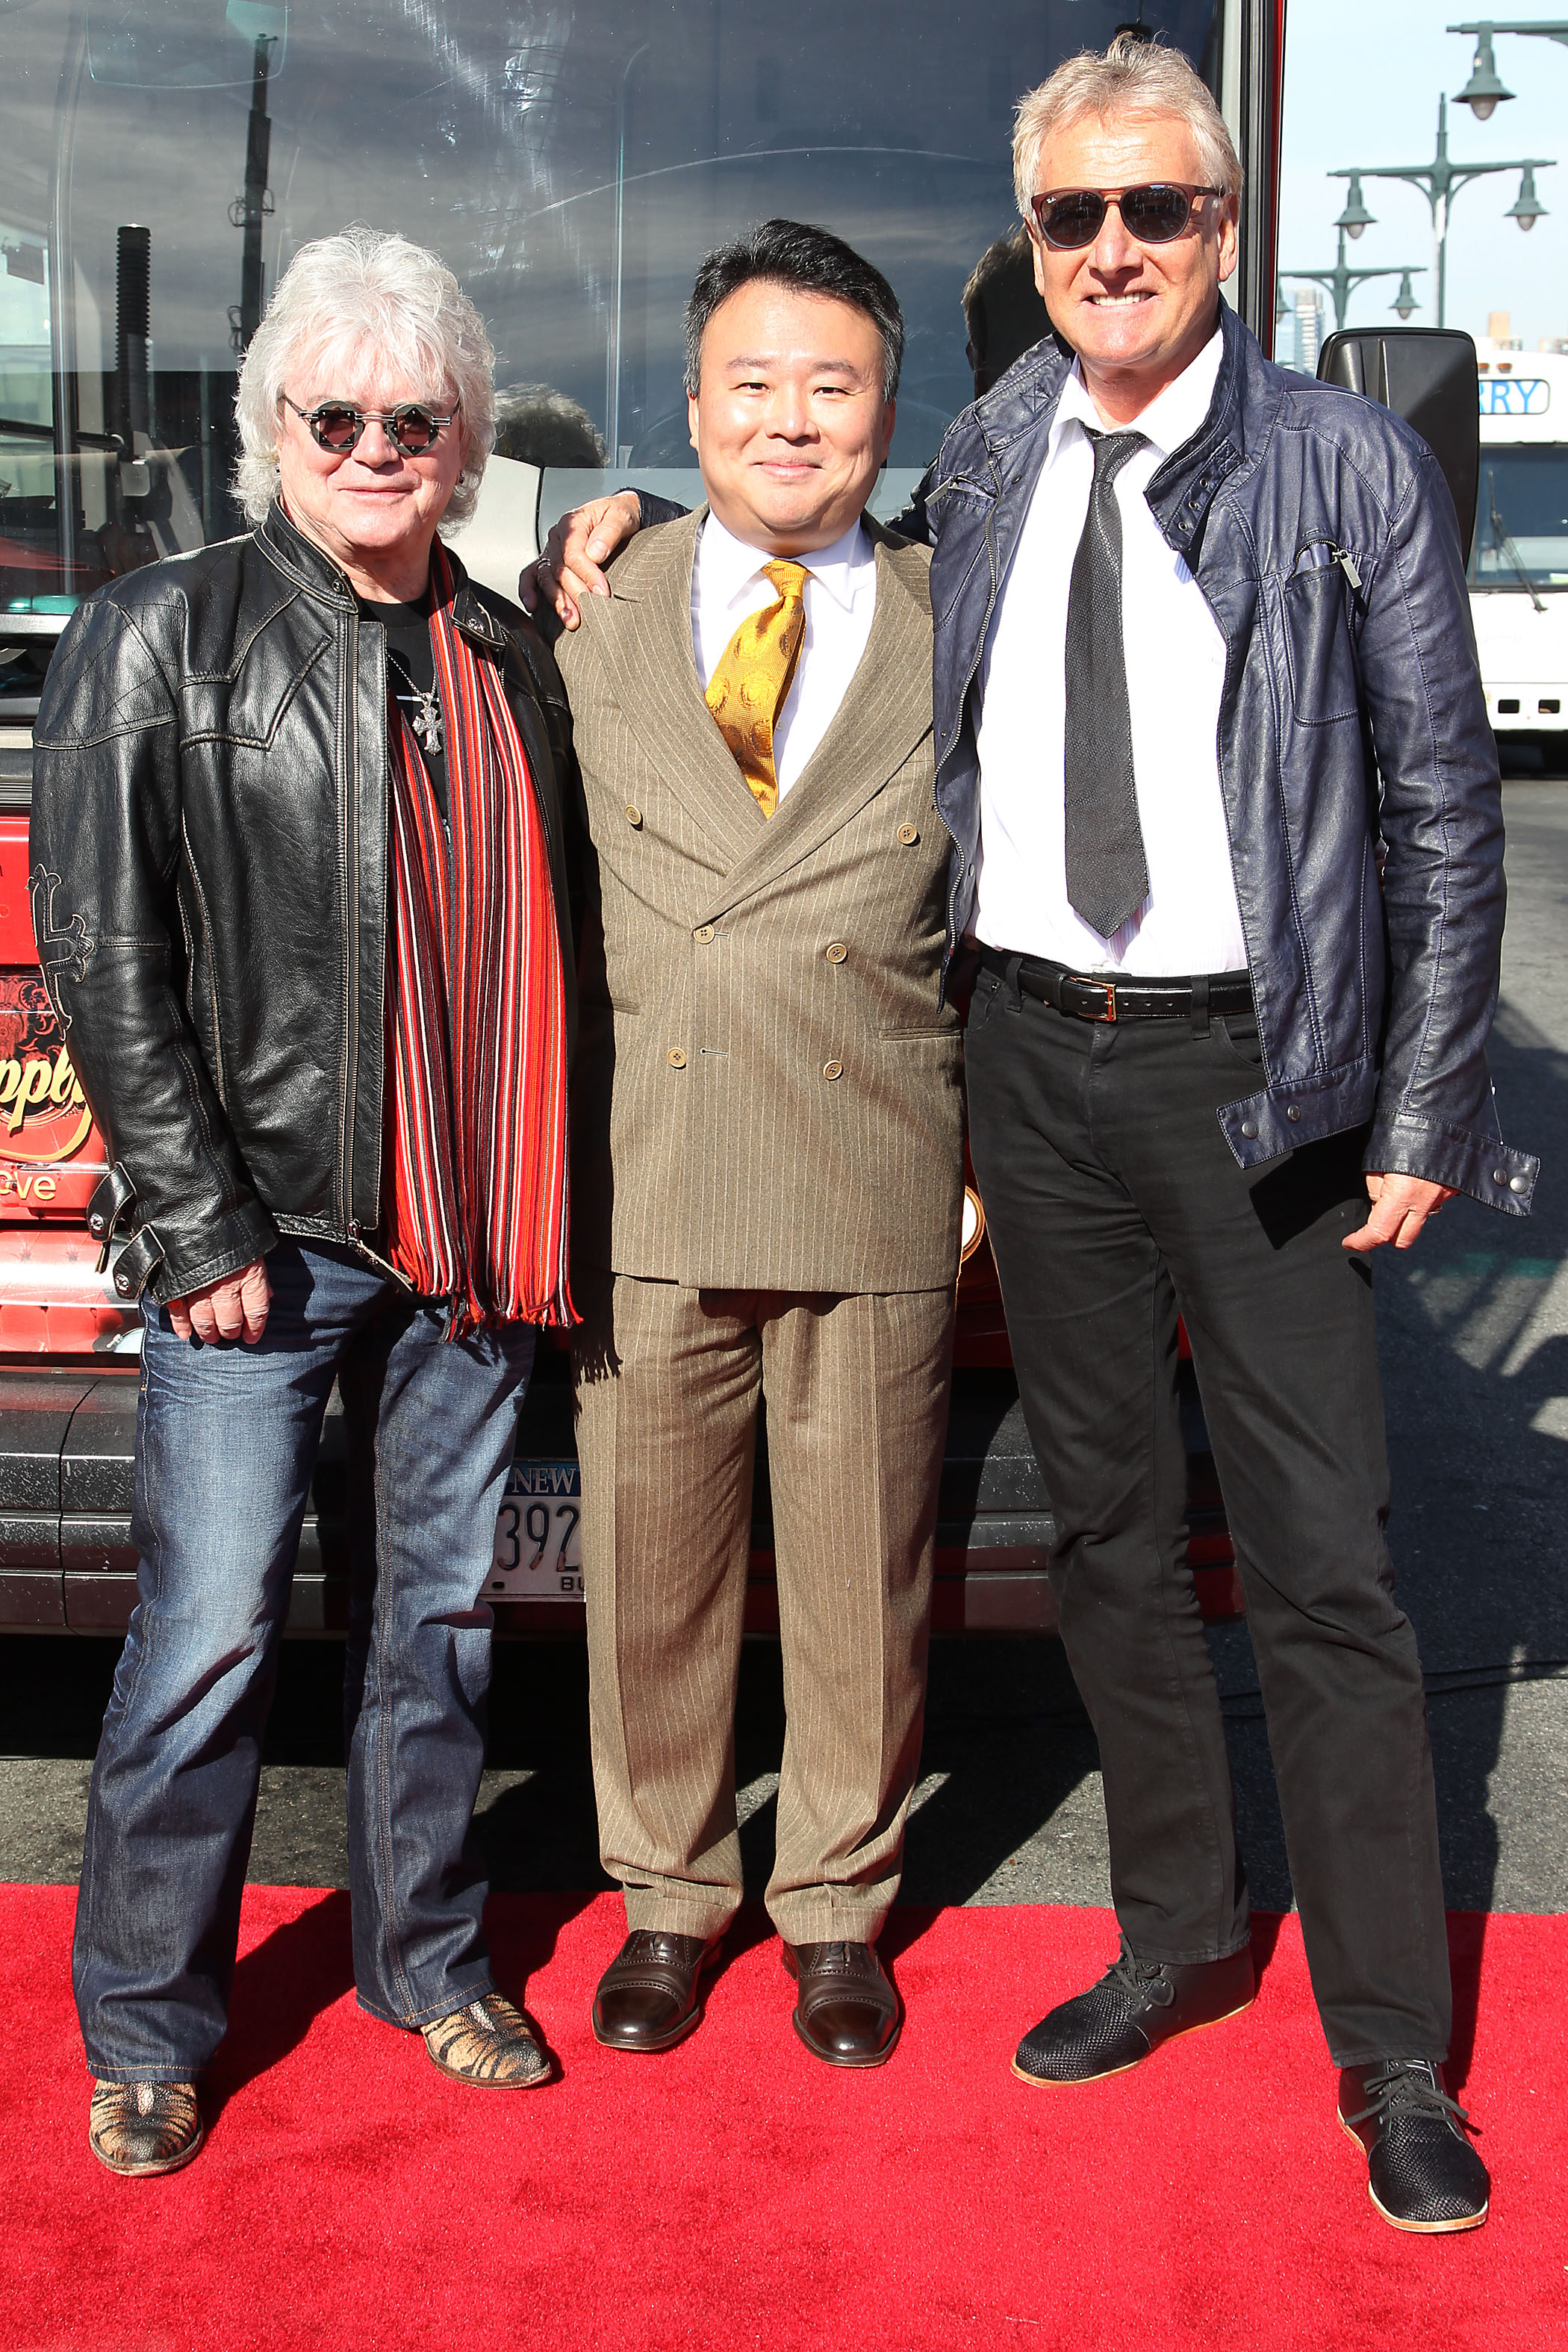 David W. Chien poses with Russell Hitchcok and Graham Russell of Air Supply at Ride of Fame (October 13th, 2012).